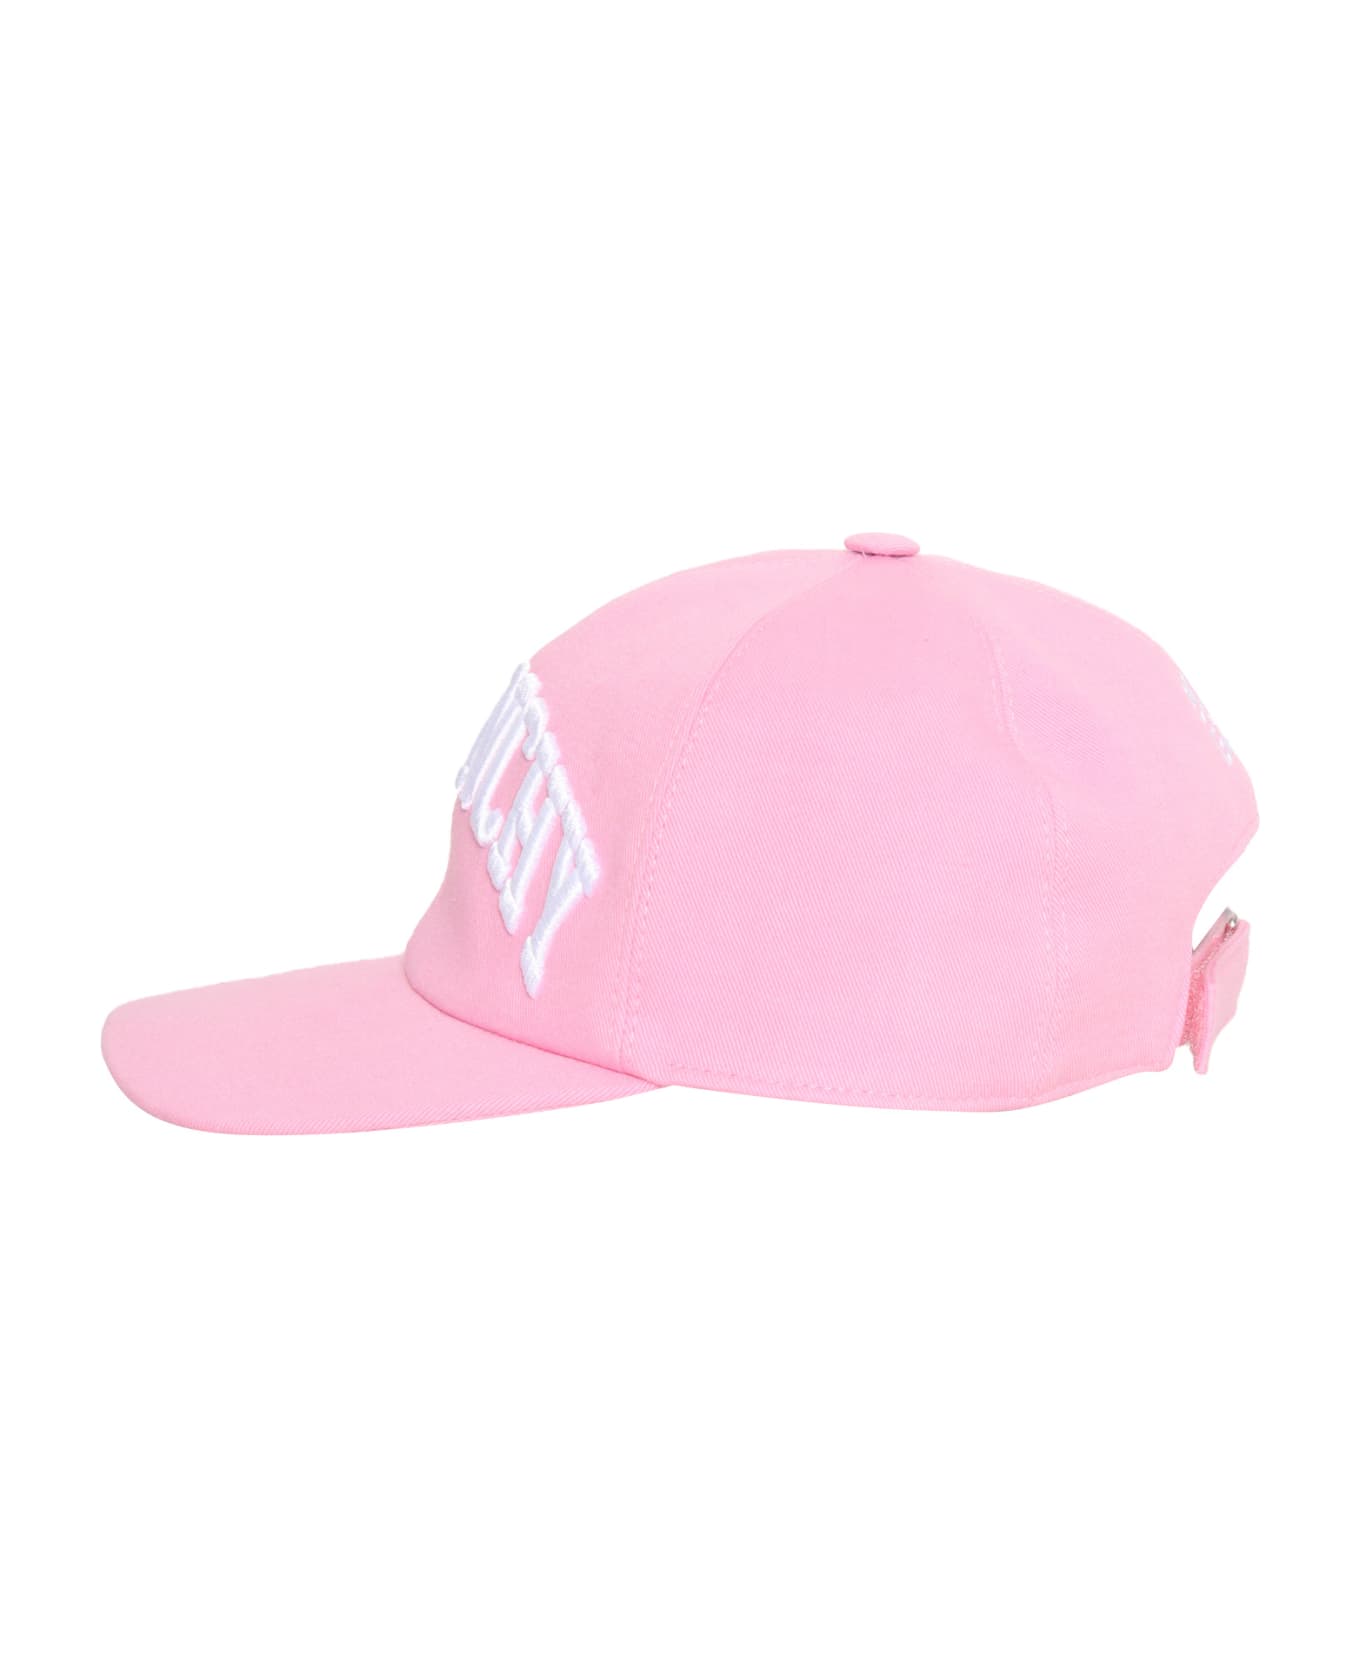 Givenchy Pink Cap With Logo - PINK アクセサリー＆ギフト